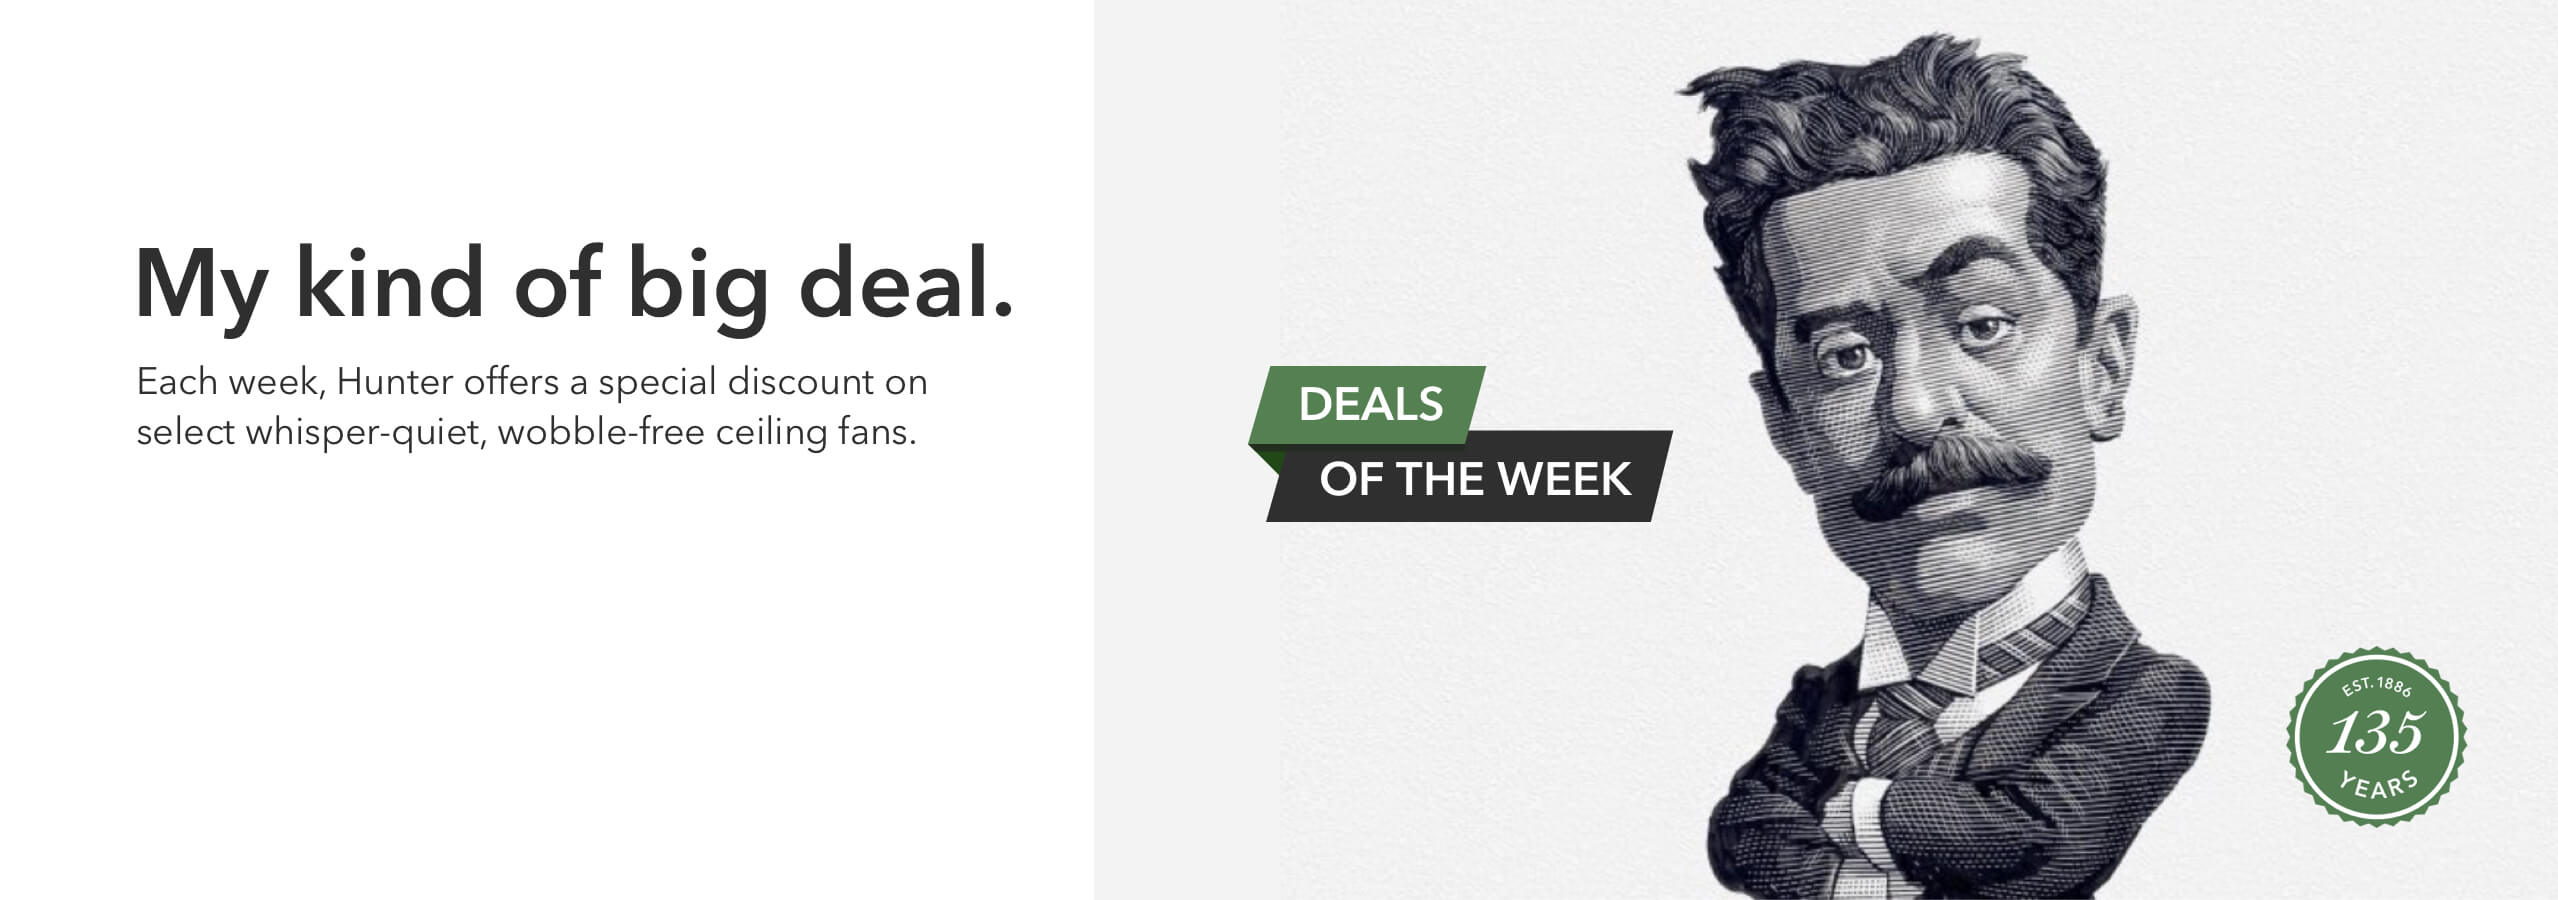 Deal of the week banner with illustration of John Hunter